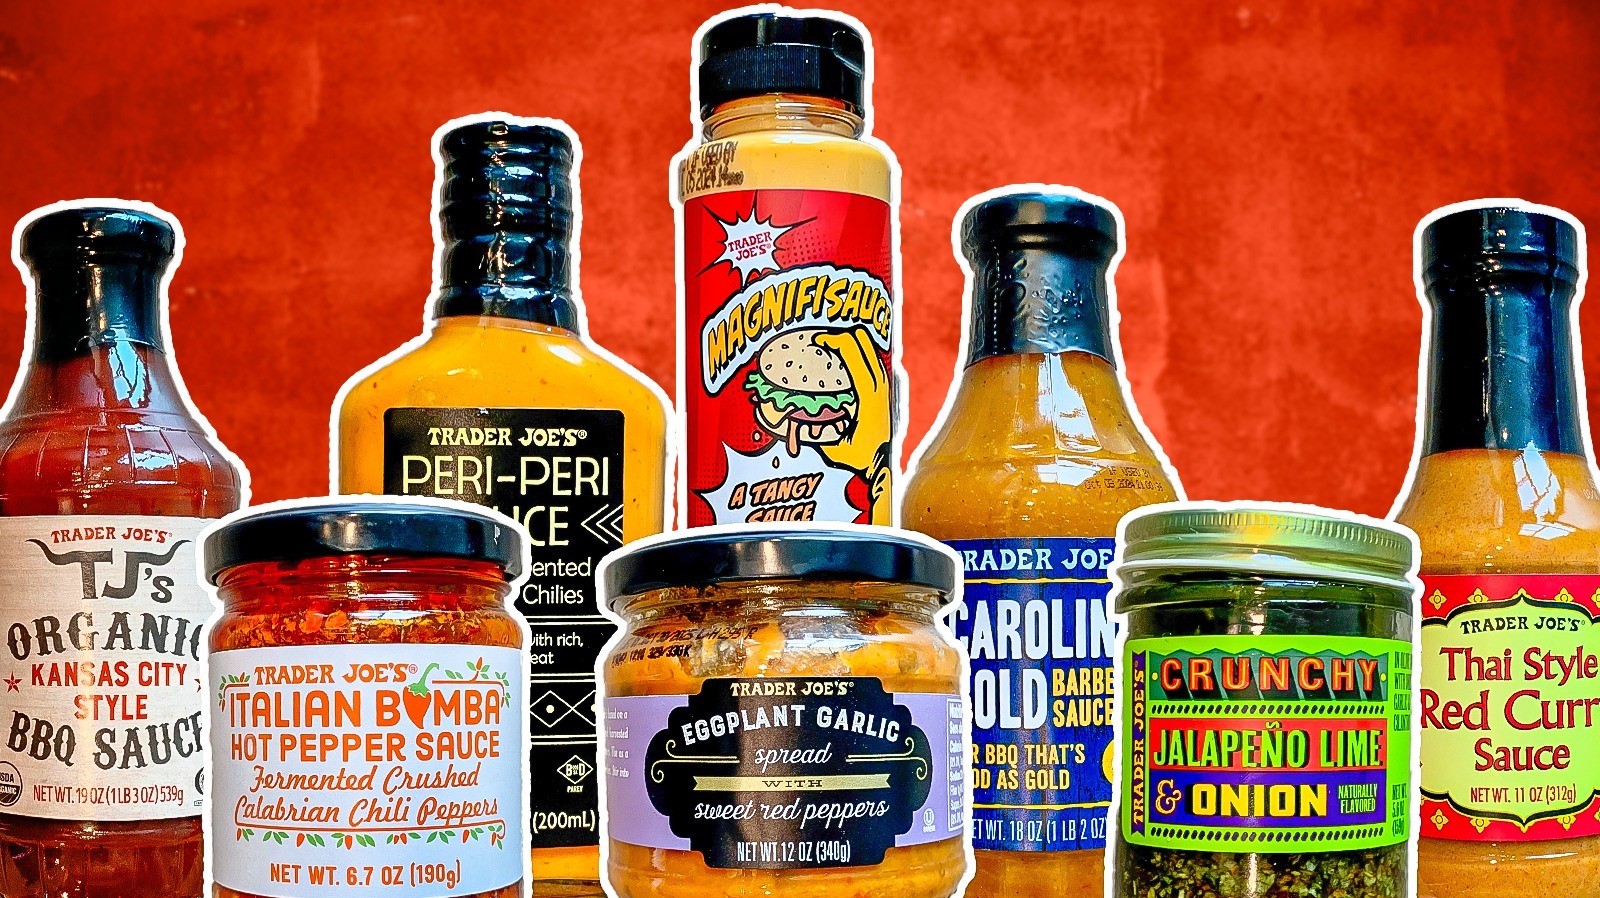 15 Best Trader Joe's Spices to Add to Your Pantry